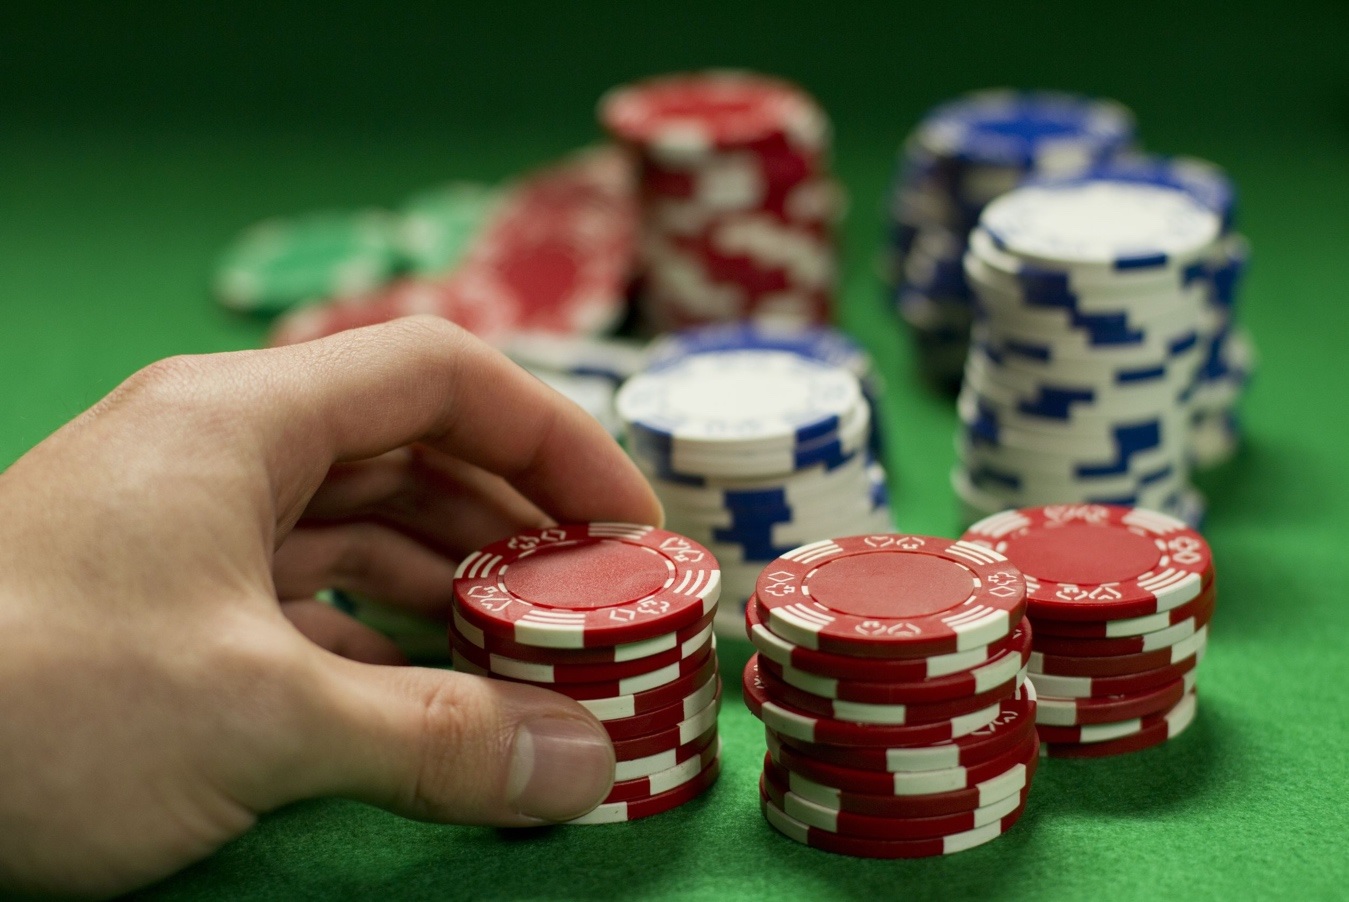 How has the game of poker (and the strategies used) changed in recent years?